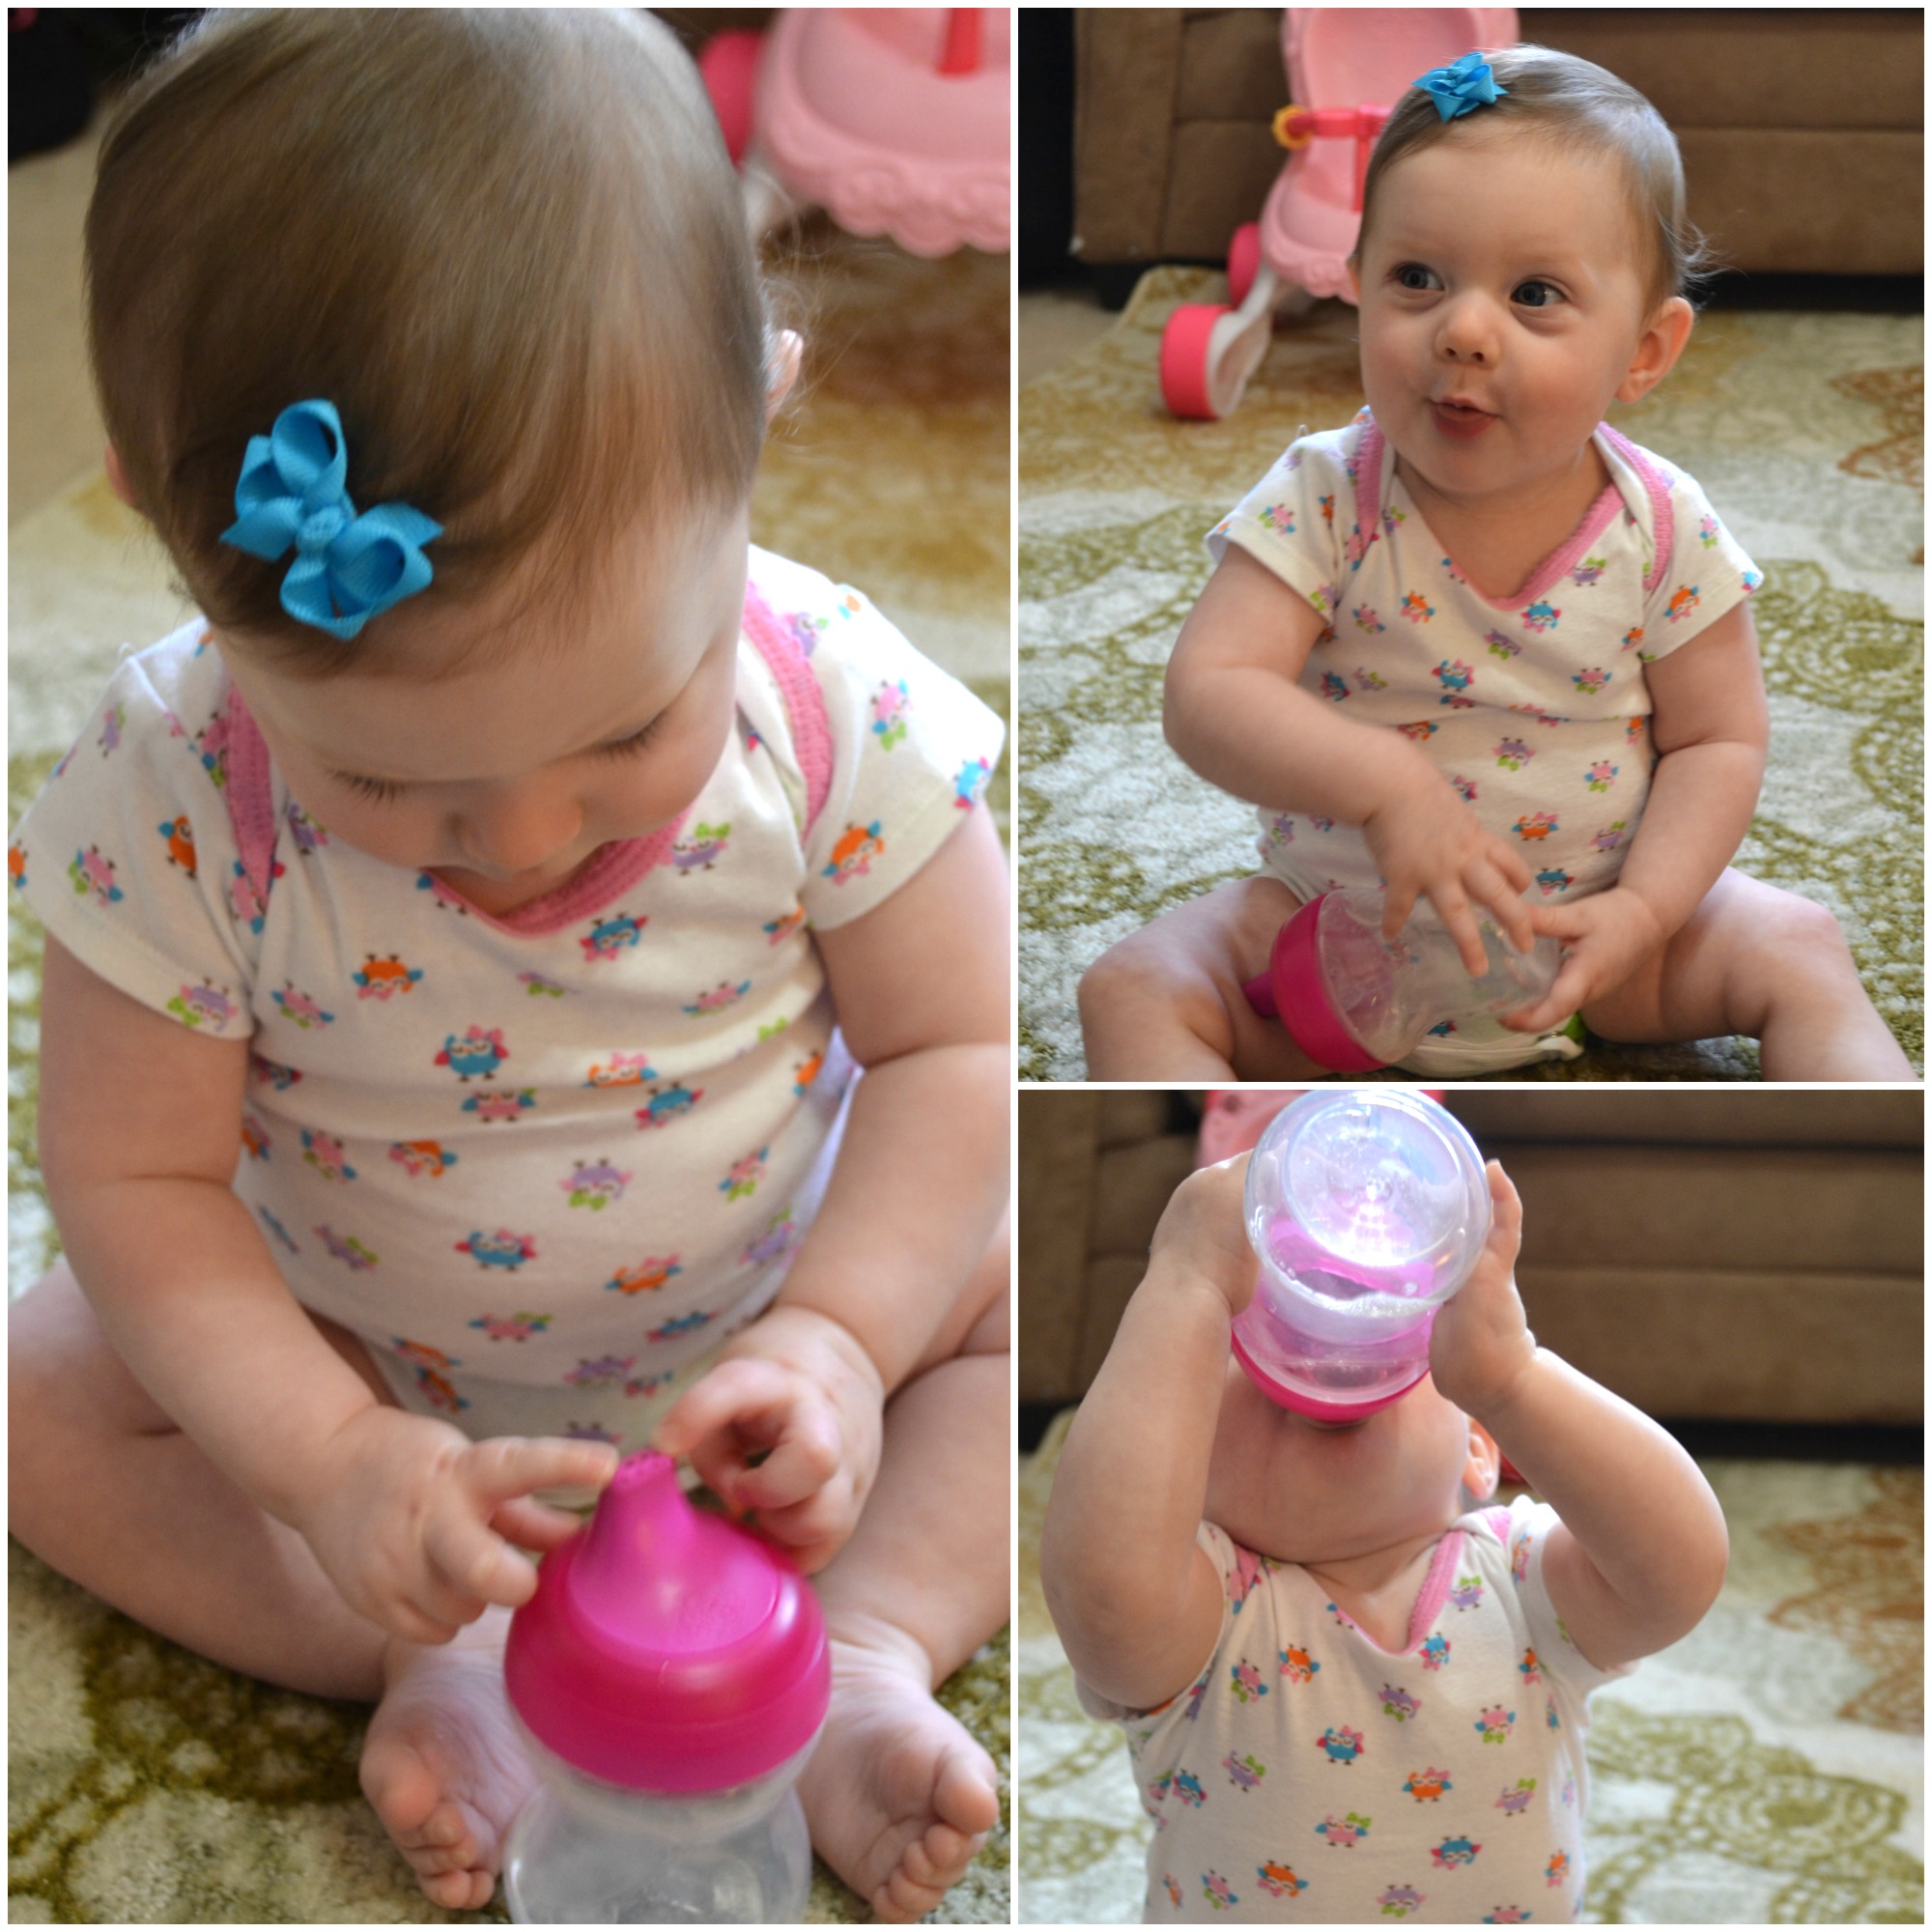 MAM - It's more than just pacifiers! Review + Giveaway Ends 4/1/16